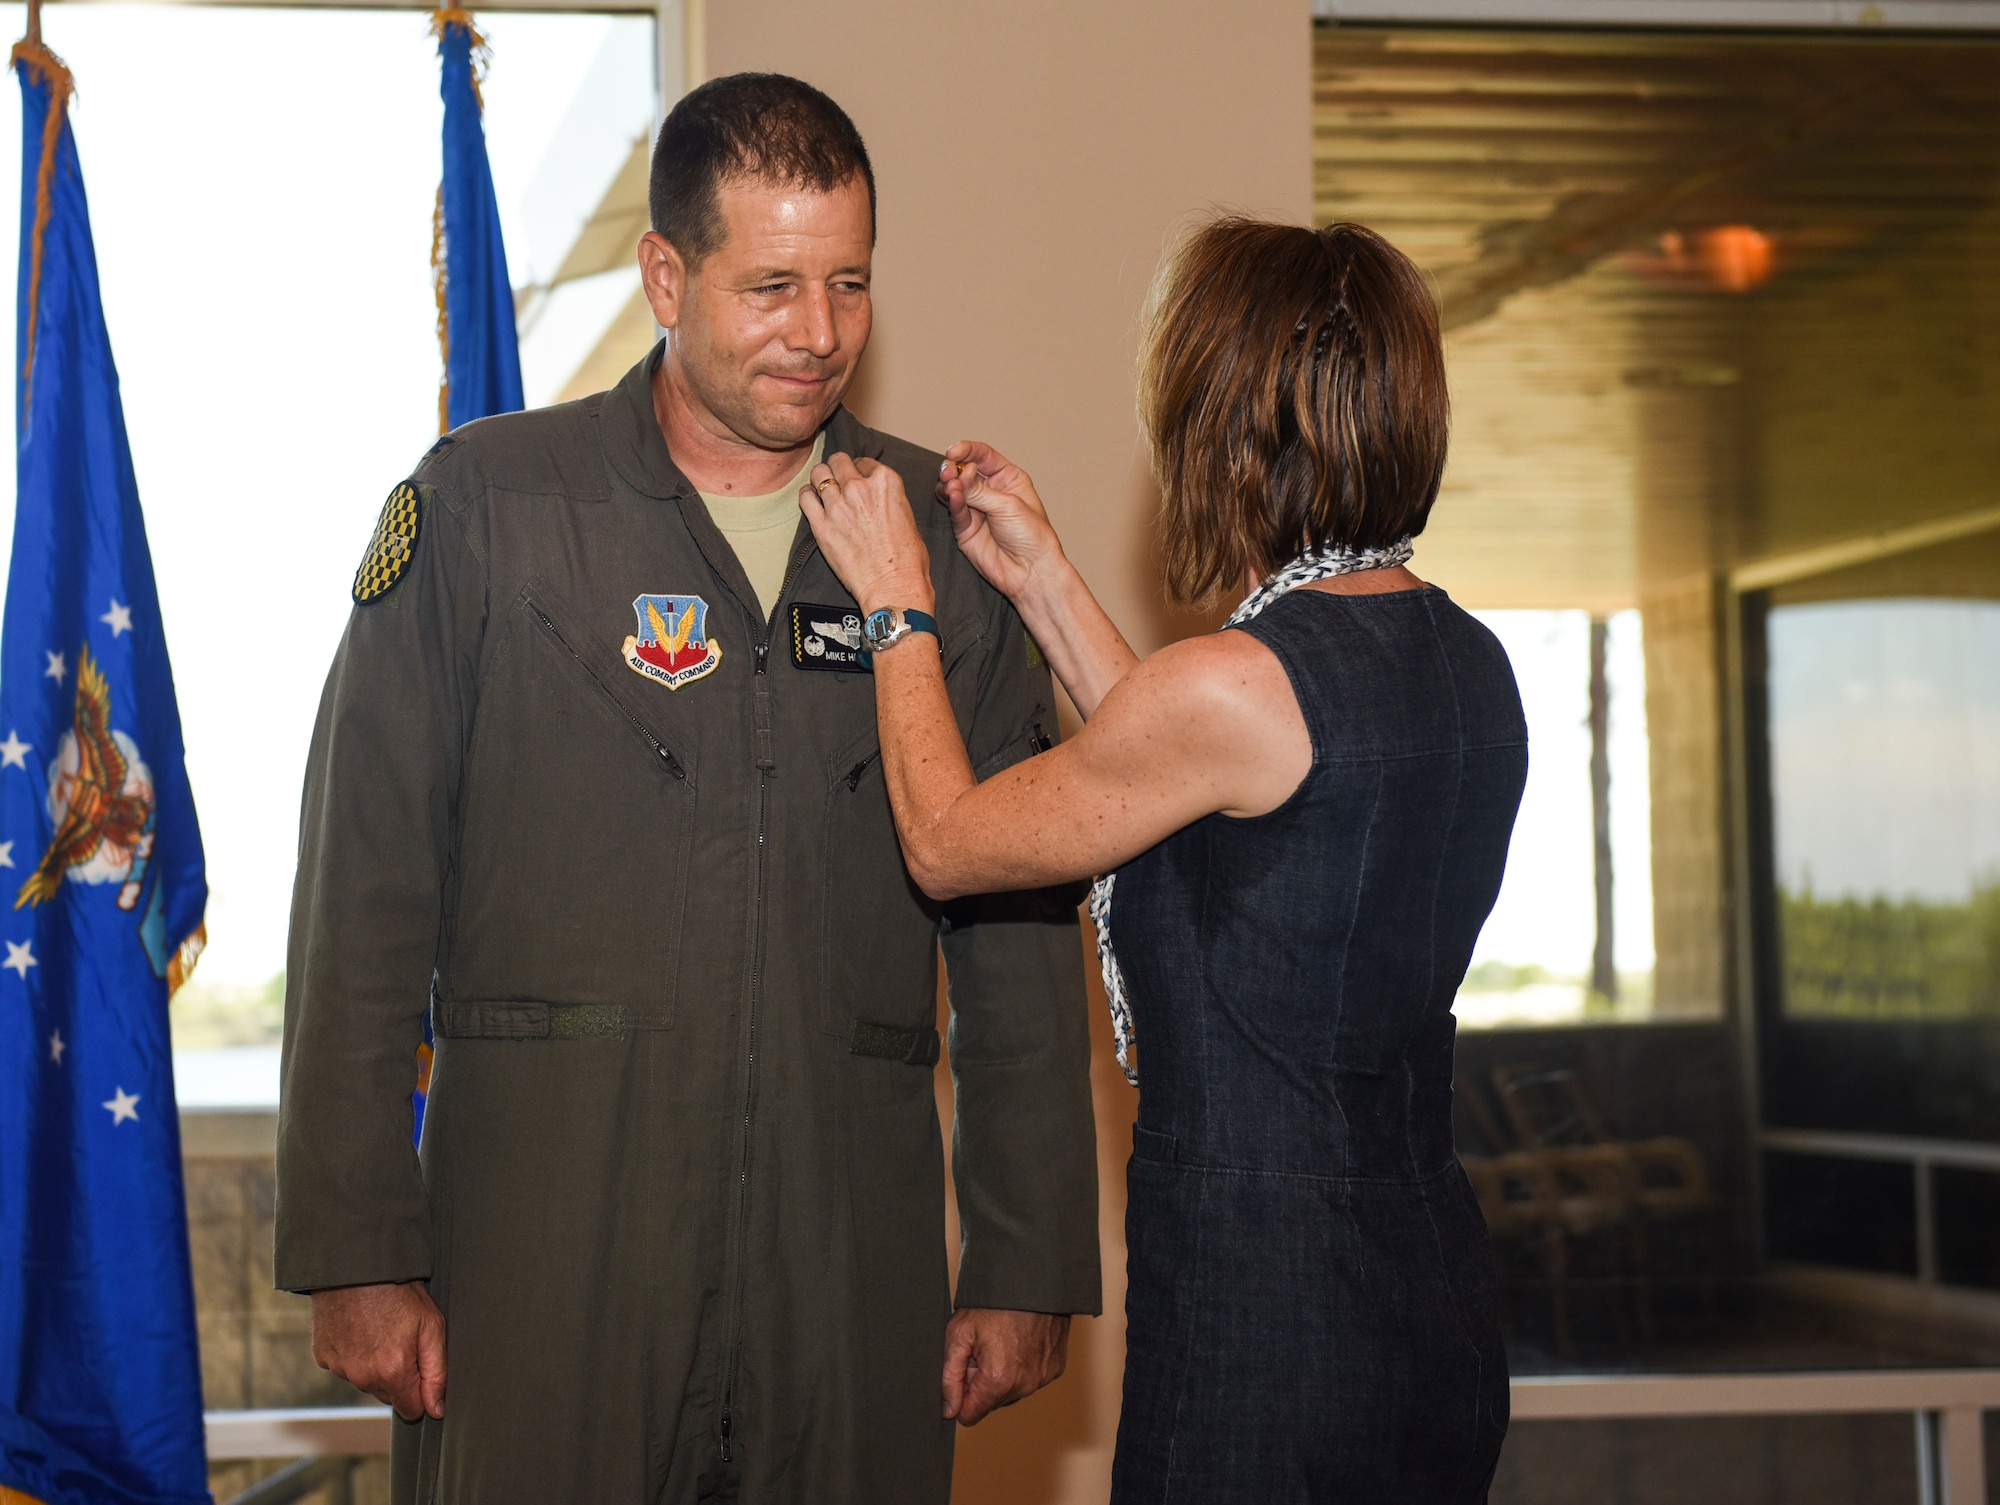 325th FW commander retires after more than 22 years